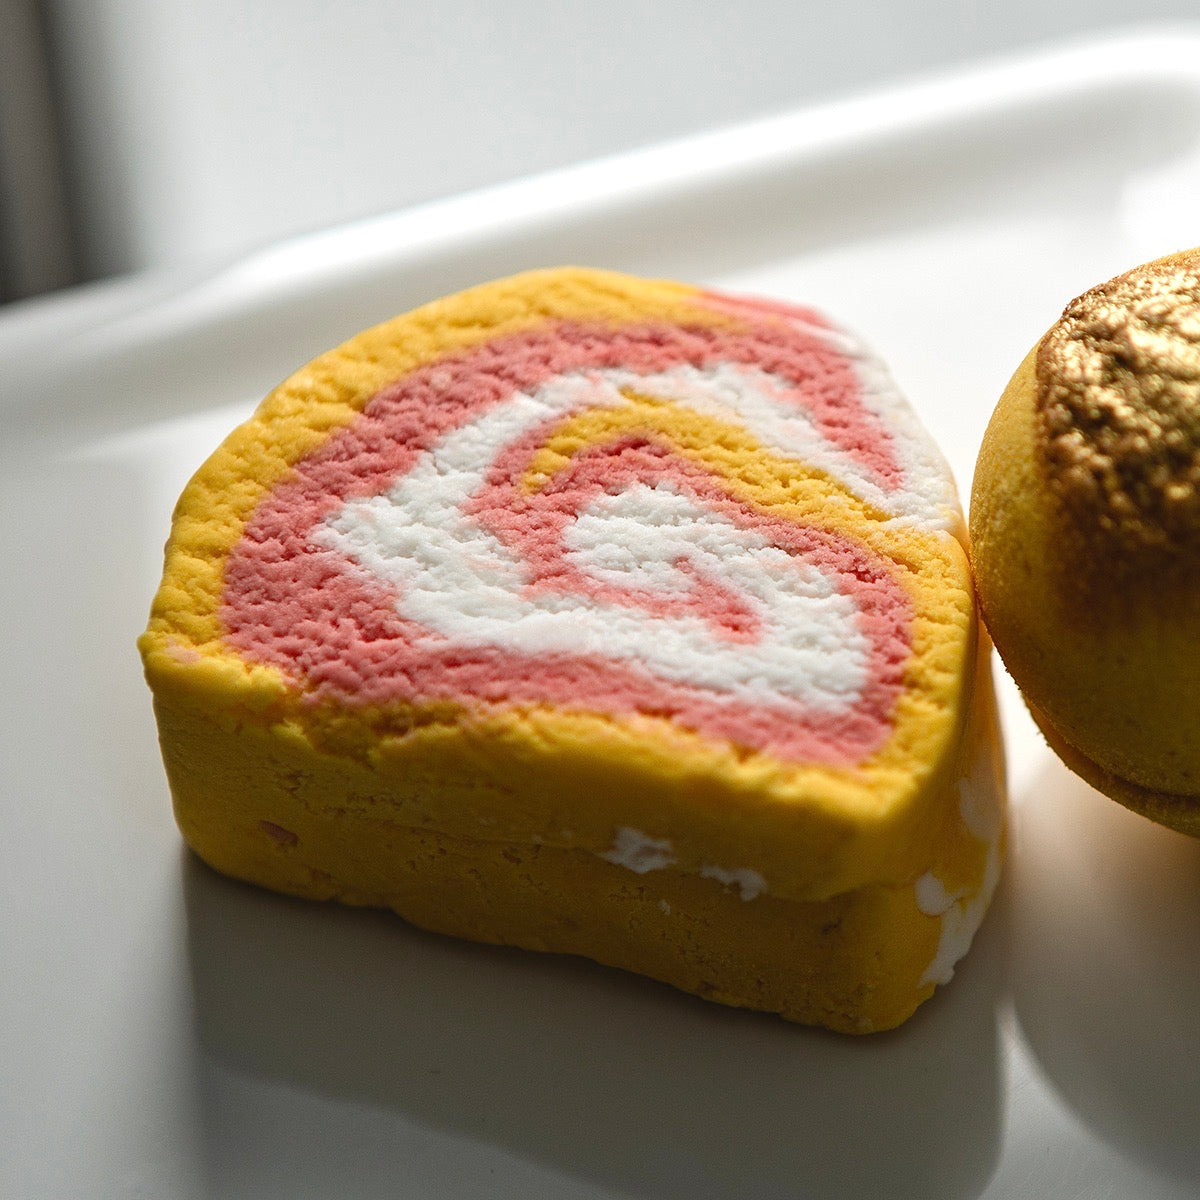 yellow bubble bar on white porcelain surface next to yellow and gold bath bomb. Bubble bar has white and red swirls. 